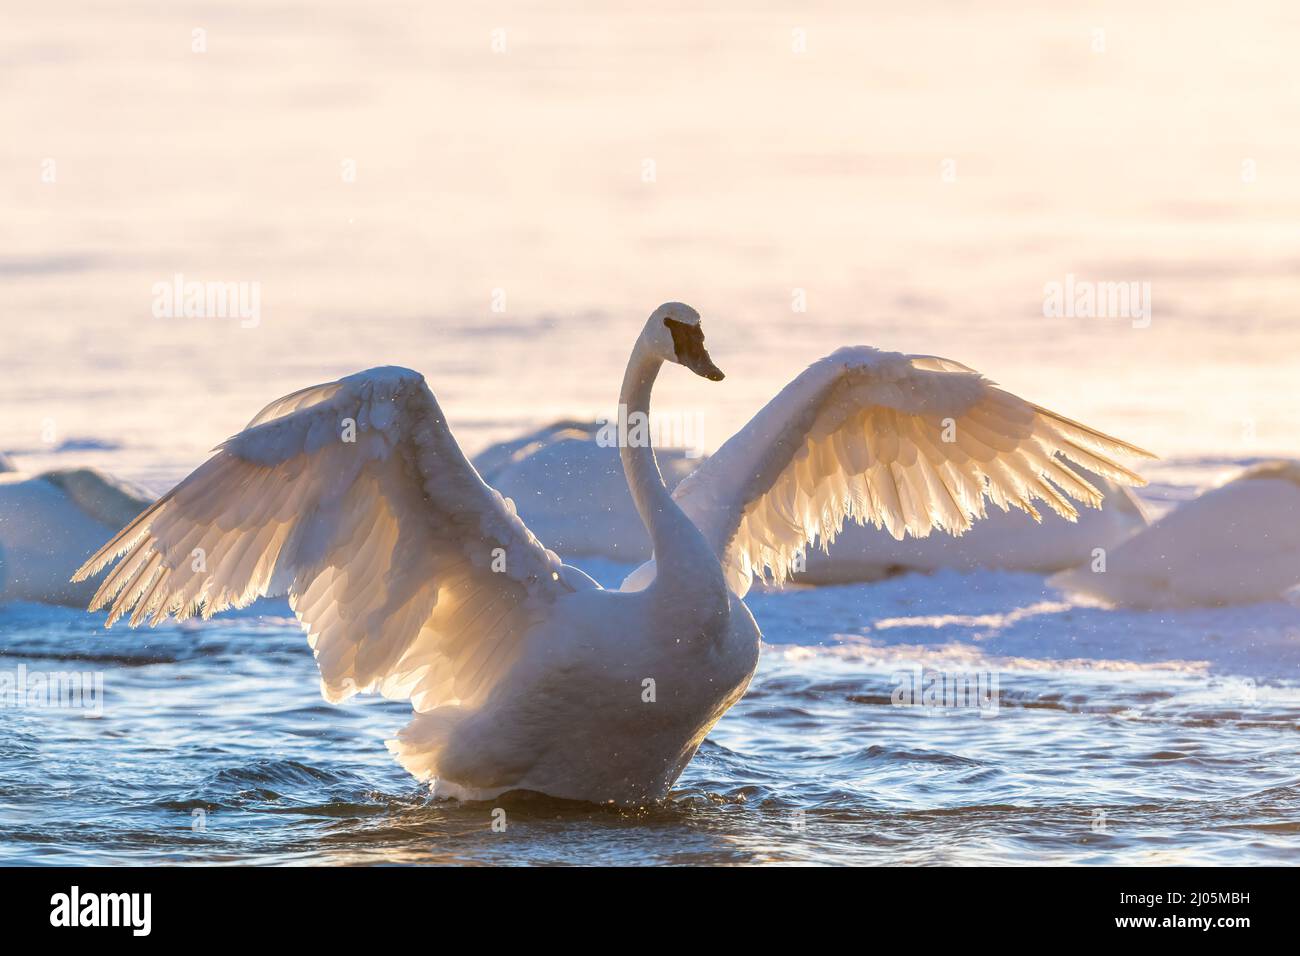 Trumpeter swan (Cygnus buccinator) stretching wings, St Croix river, Winter, WI, USA, by Dominique Braud/Dembinsky Photo Assoc Stock Photo